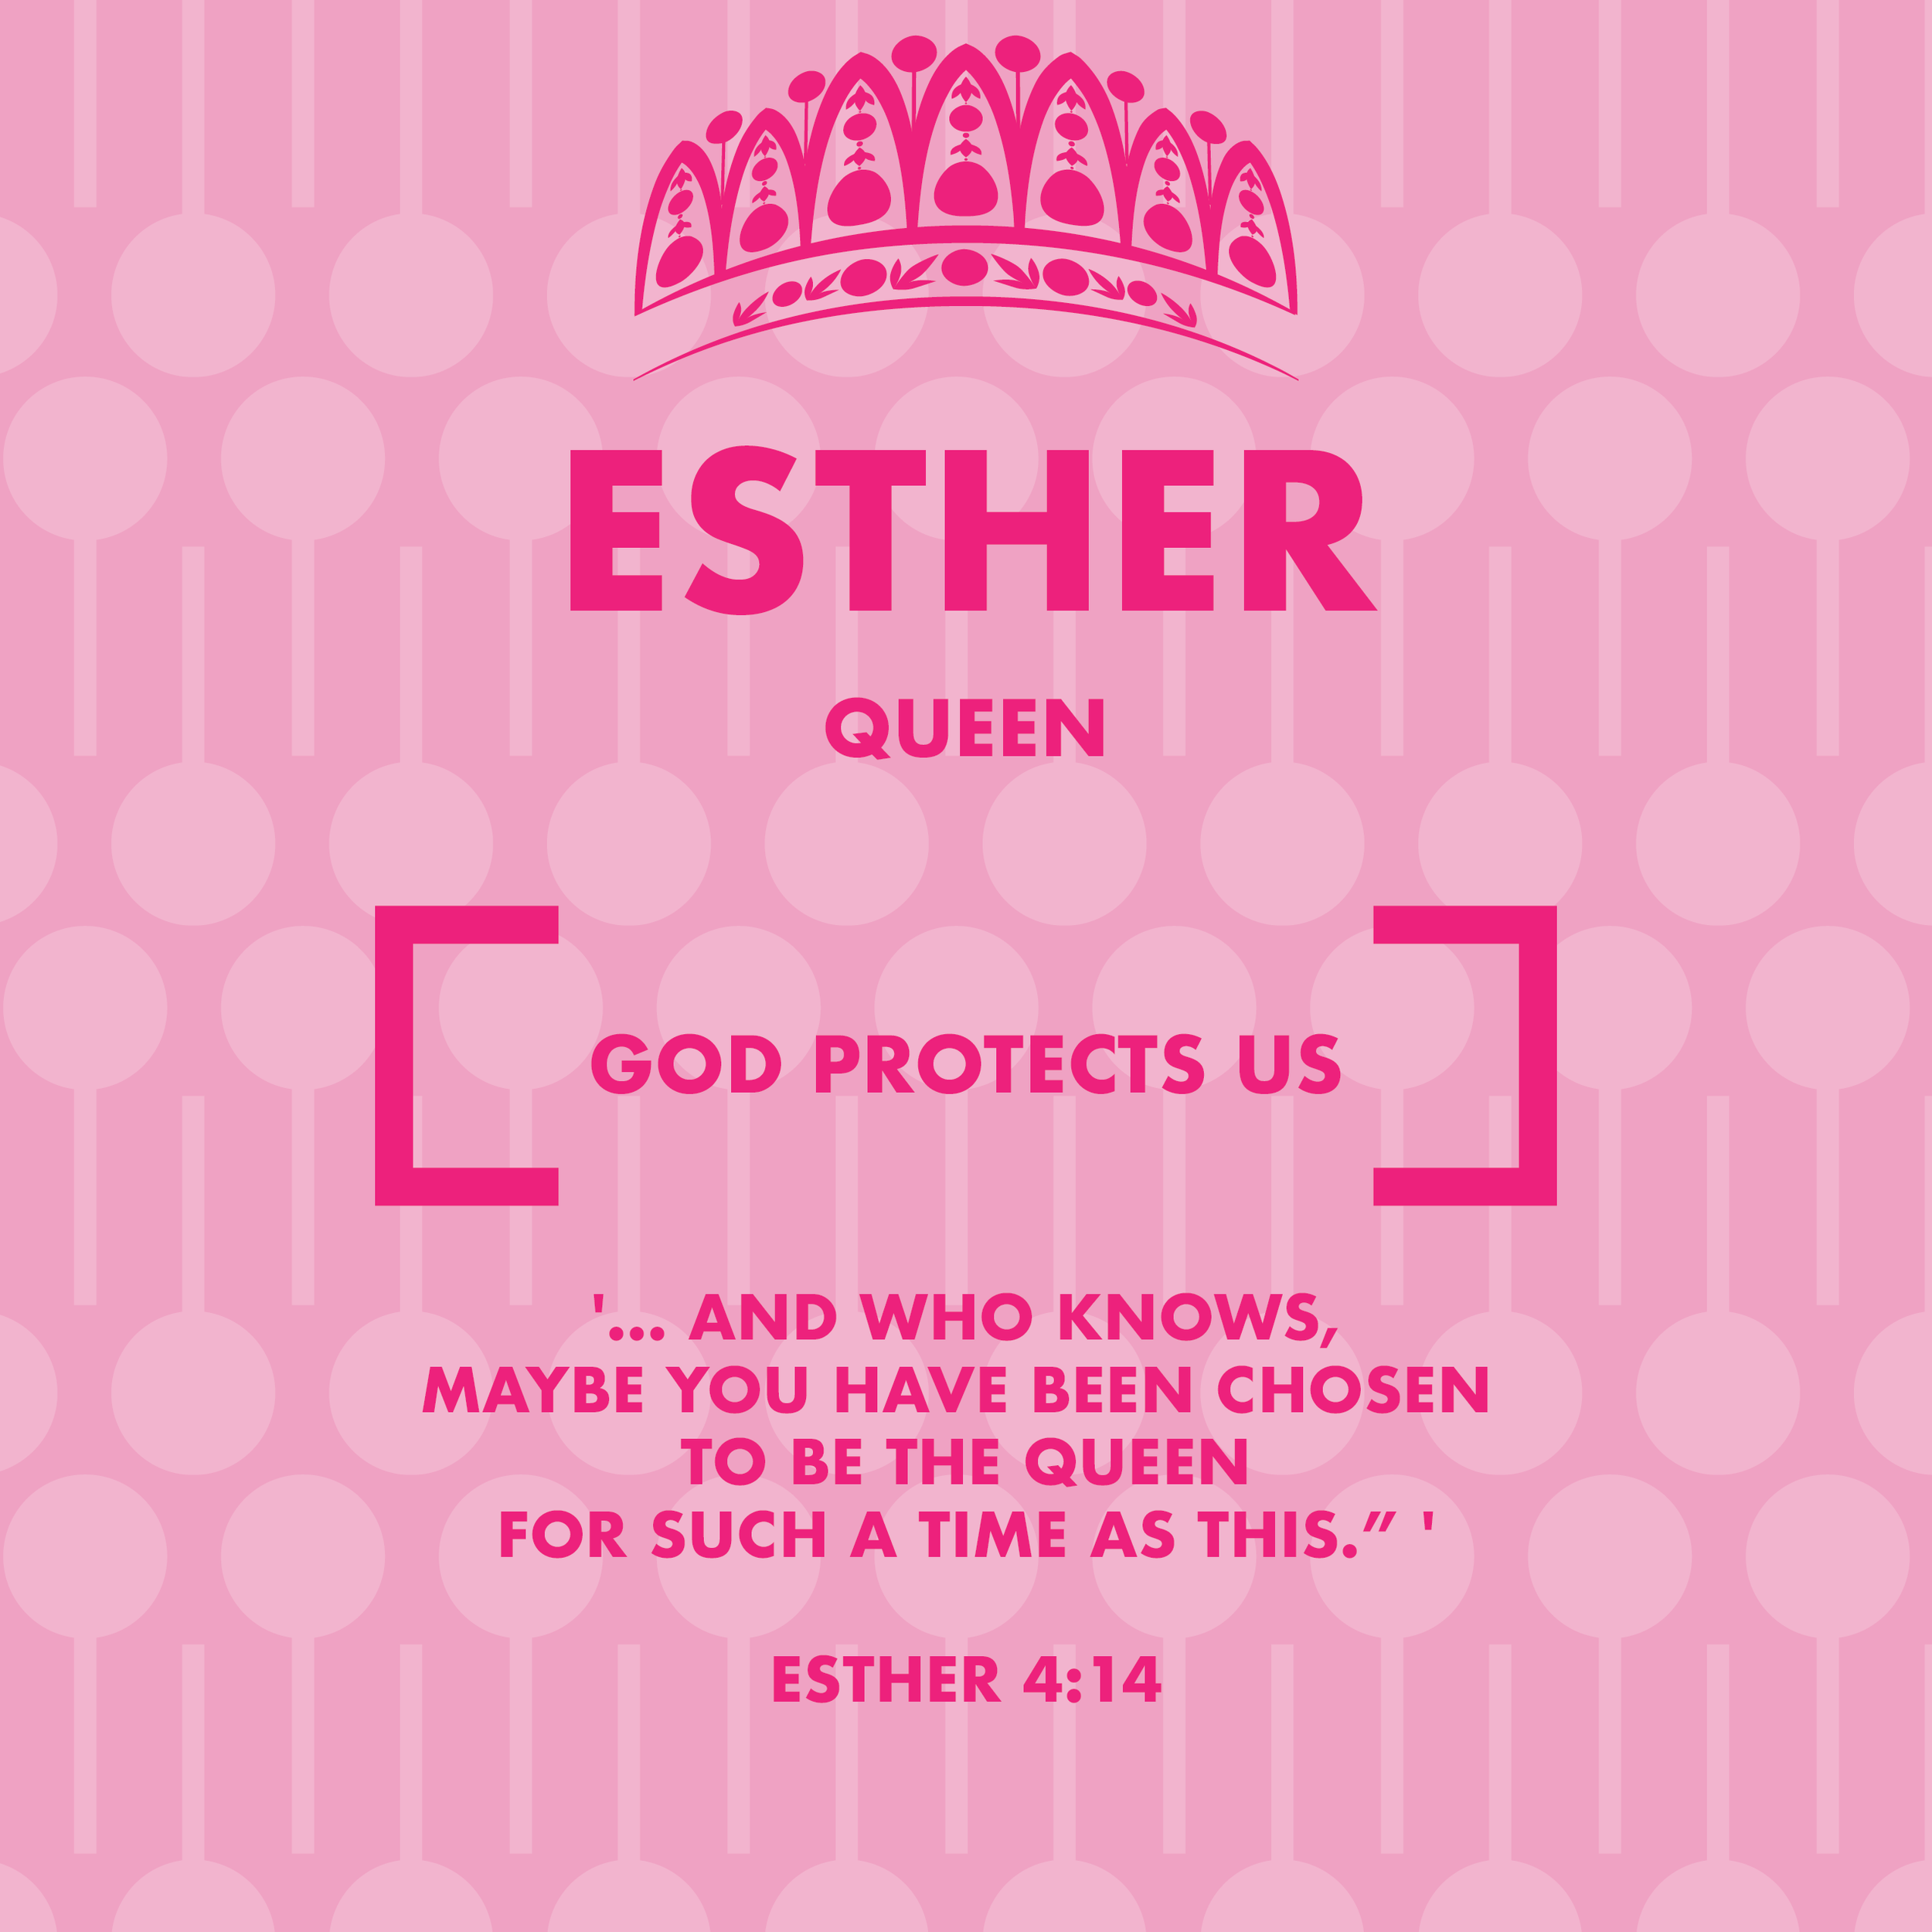 Books of the Bible_posters_15 Esther.png